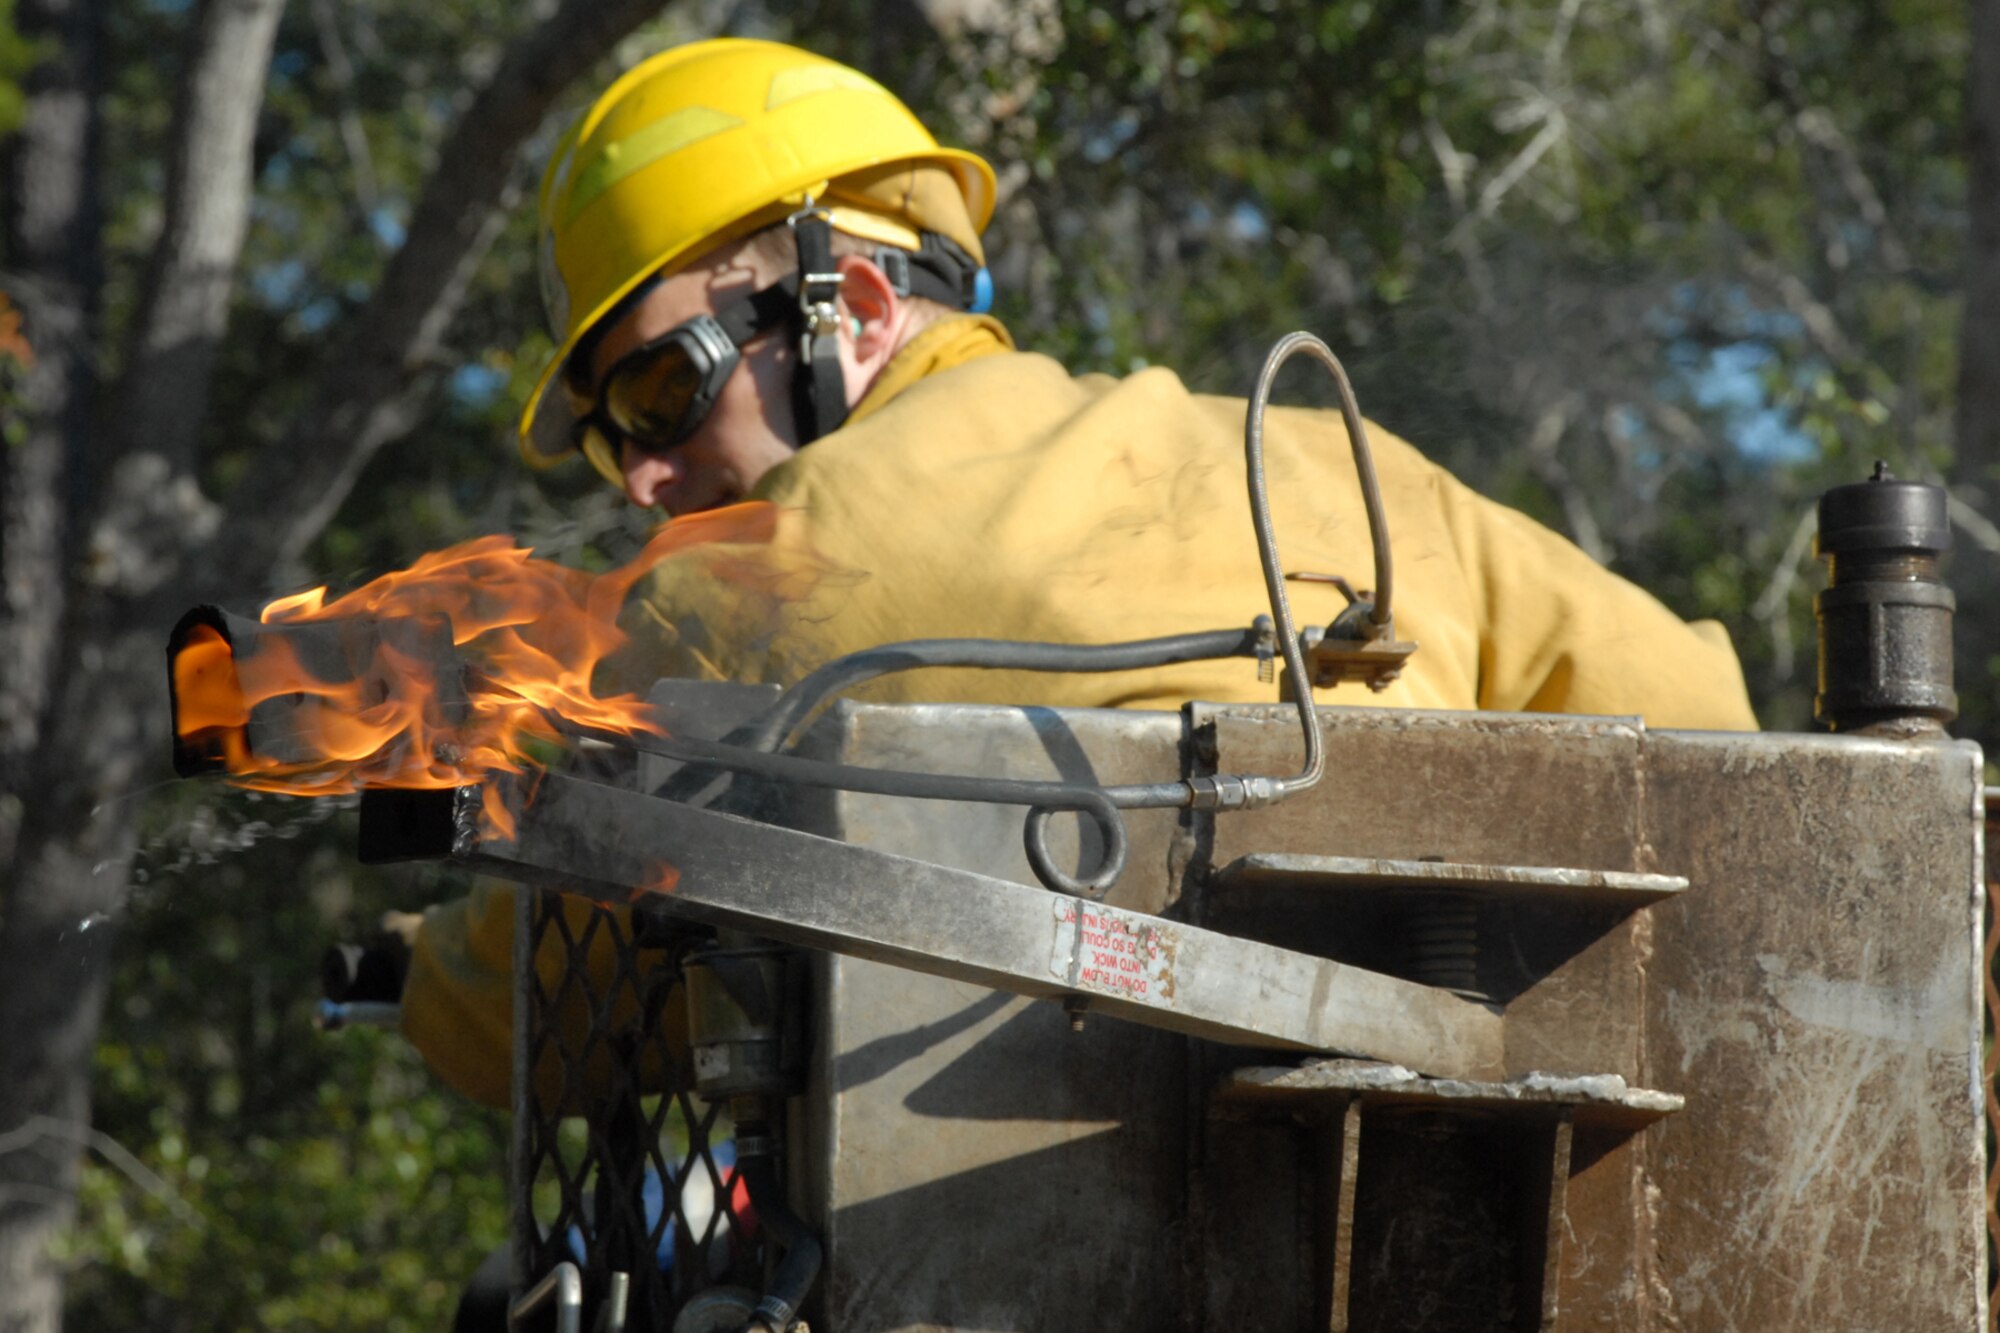 EGLIN AIR FORCE BASE, Fla. -- Tom Murrie, a Jackson Guard forestry technician and wildland fire specialist, uses a mixture of fuels in a drip line to spark a prescribed fire from an all terrain vehicle at White Point, an 85-acre recreation area on the Choctawhatchee Bay Jan. 29. Many native plants and animal species depend on Eglin?s fire-dependent long-leaf pine ecosystem, 11 of which are federally protected. Endangered species such as the red-cockaded woodpecker, depend on fire that is typically caused by either lightning strikes or Eglin's resident fire managers to survive. As of the 2008 control burn season, Jackson Guard's five-year average is 73,000 acres burned annually. (U.S. Air Force Photo by Staff Sgt. Mike Meares)